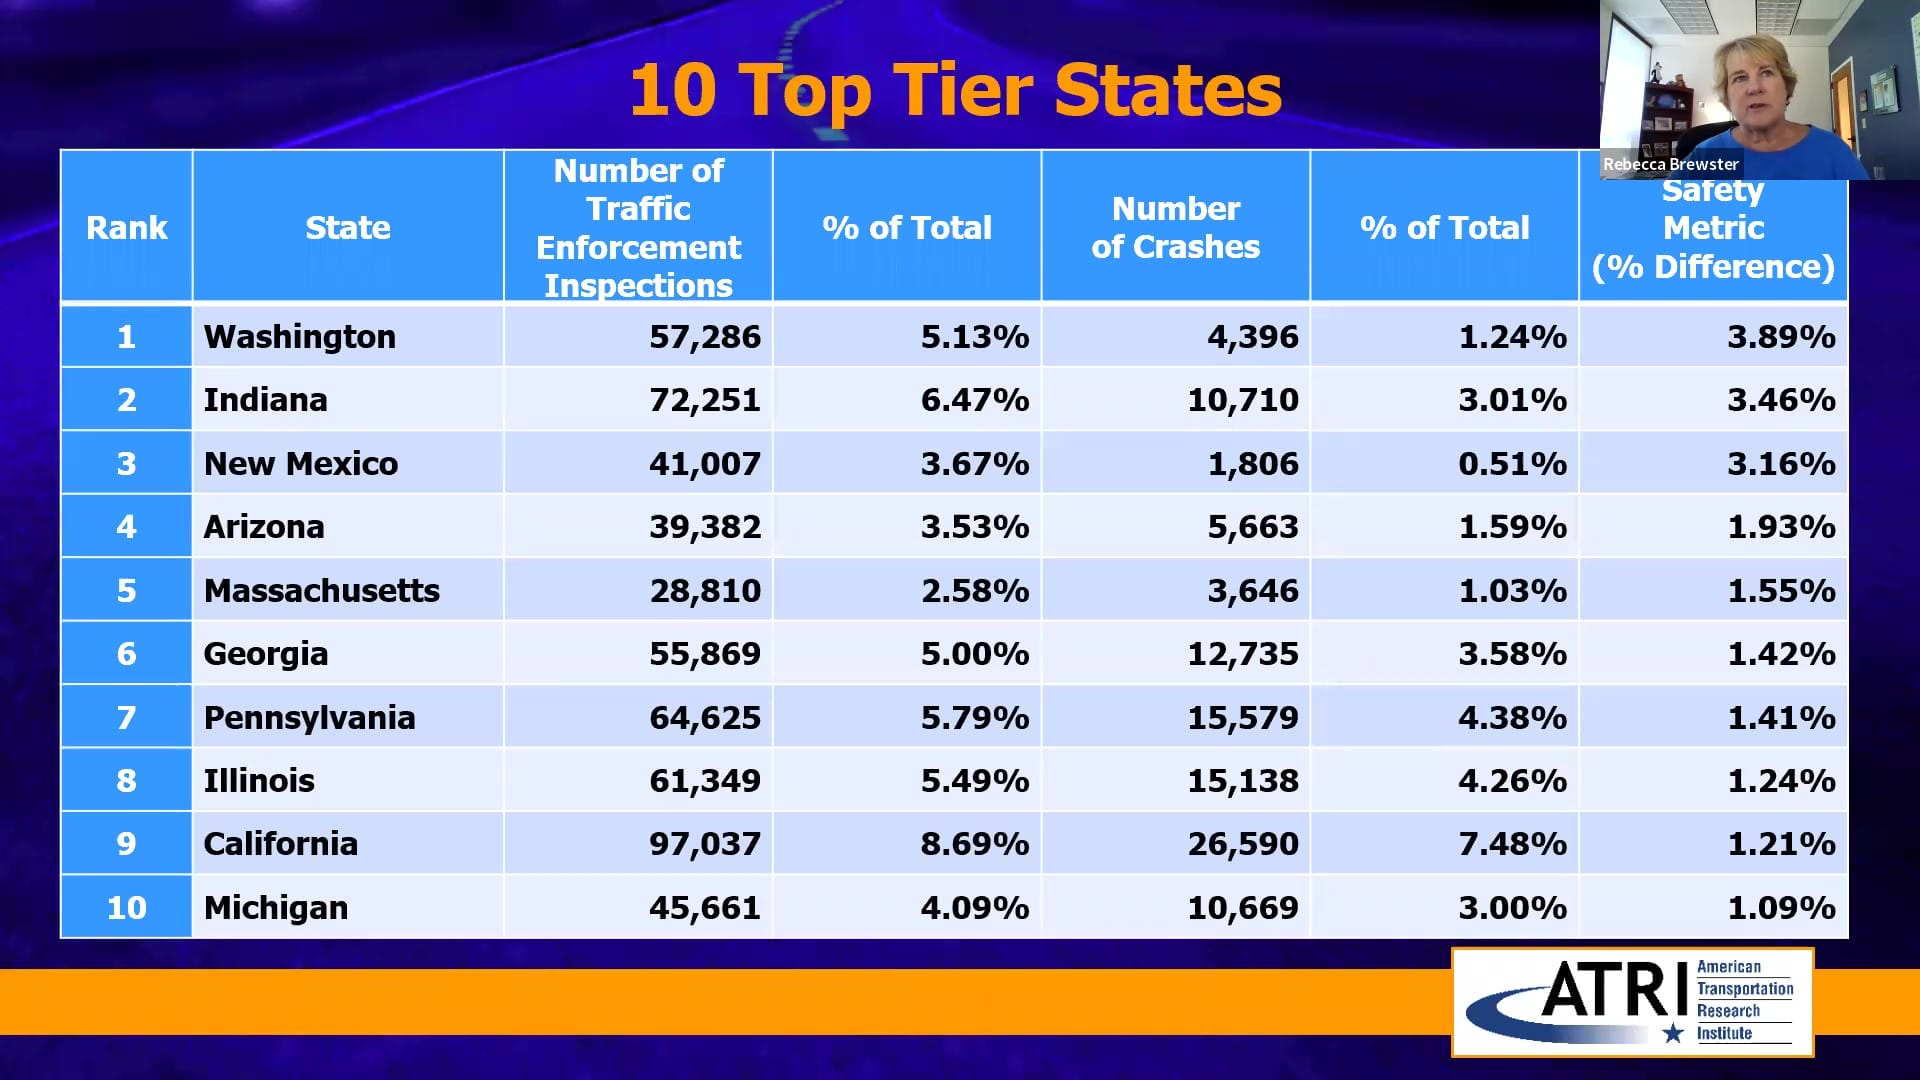 Trucking Top 10 Safety Metric